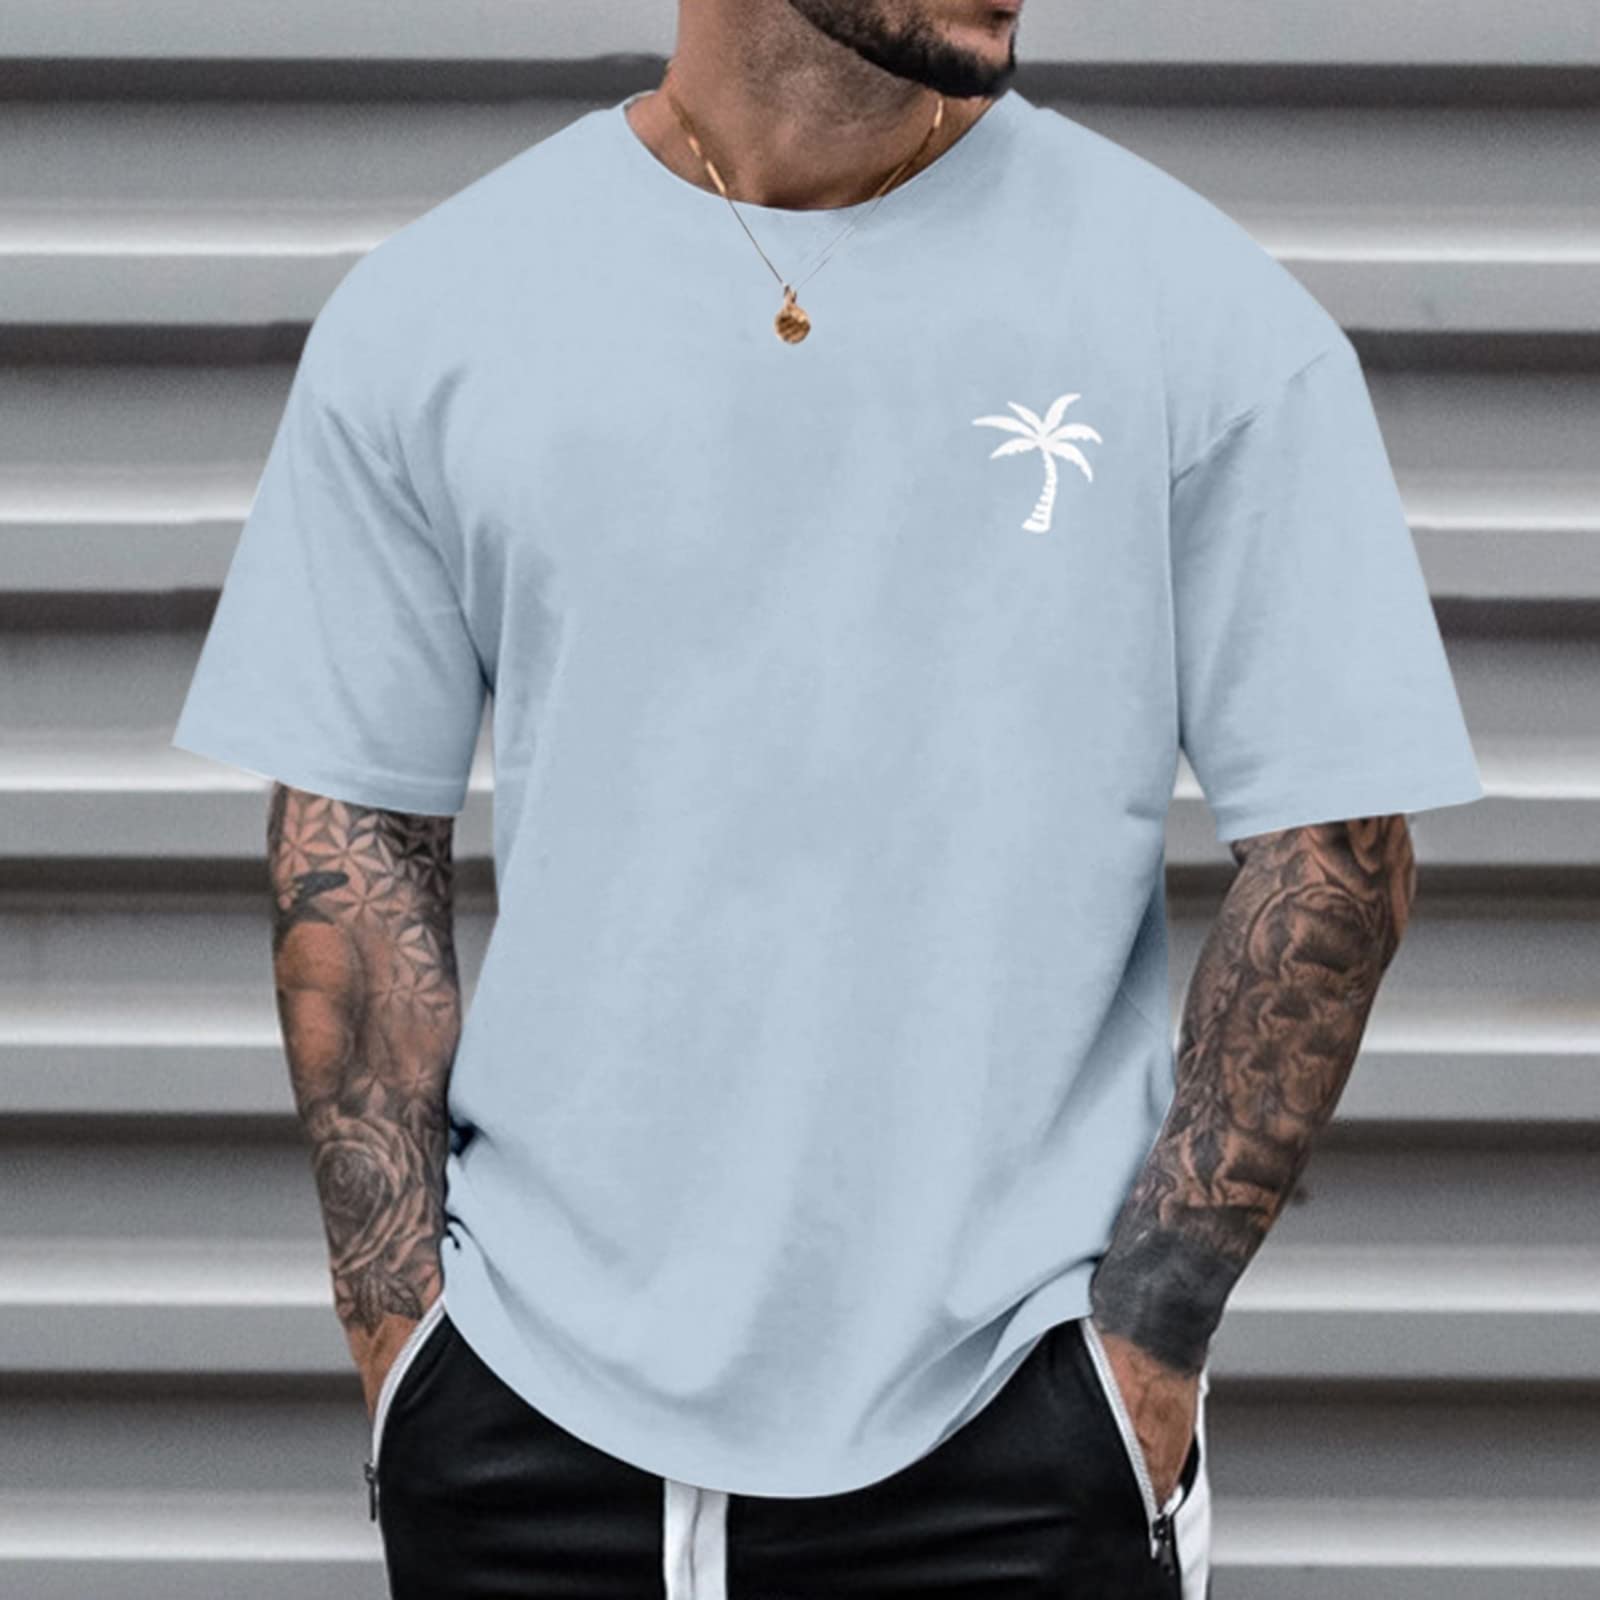 Graphic T-Shirts for Men Mens Big and Tall Graphic T Shirts Funny T Shirts Men's Quick Dry Shirts Creative Letters Retro Print Round Neck Loose Summer Fashion 90S Shirts Men 1-Light Blue Large